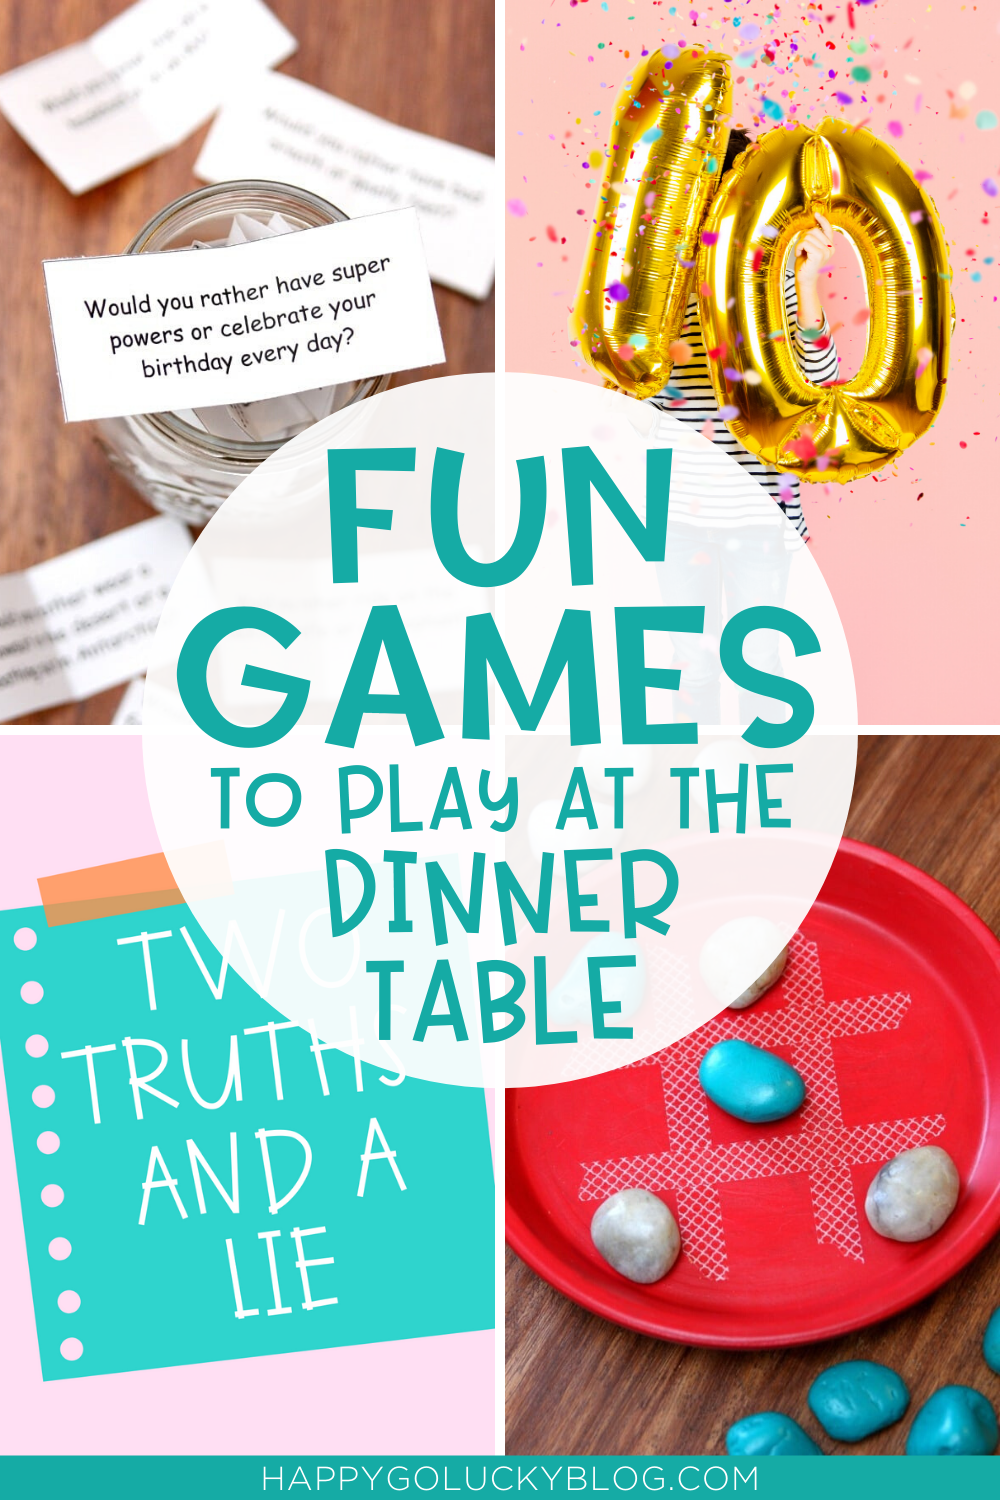 Fun Games to Play at the Dinner Table